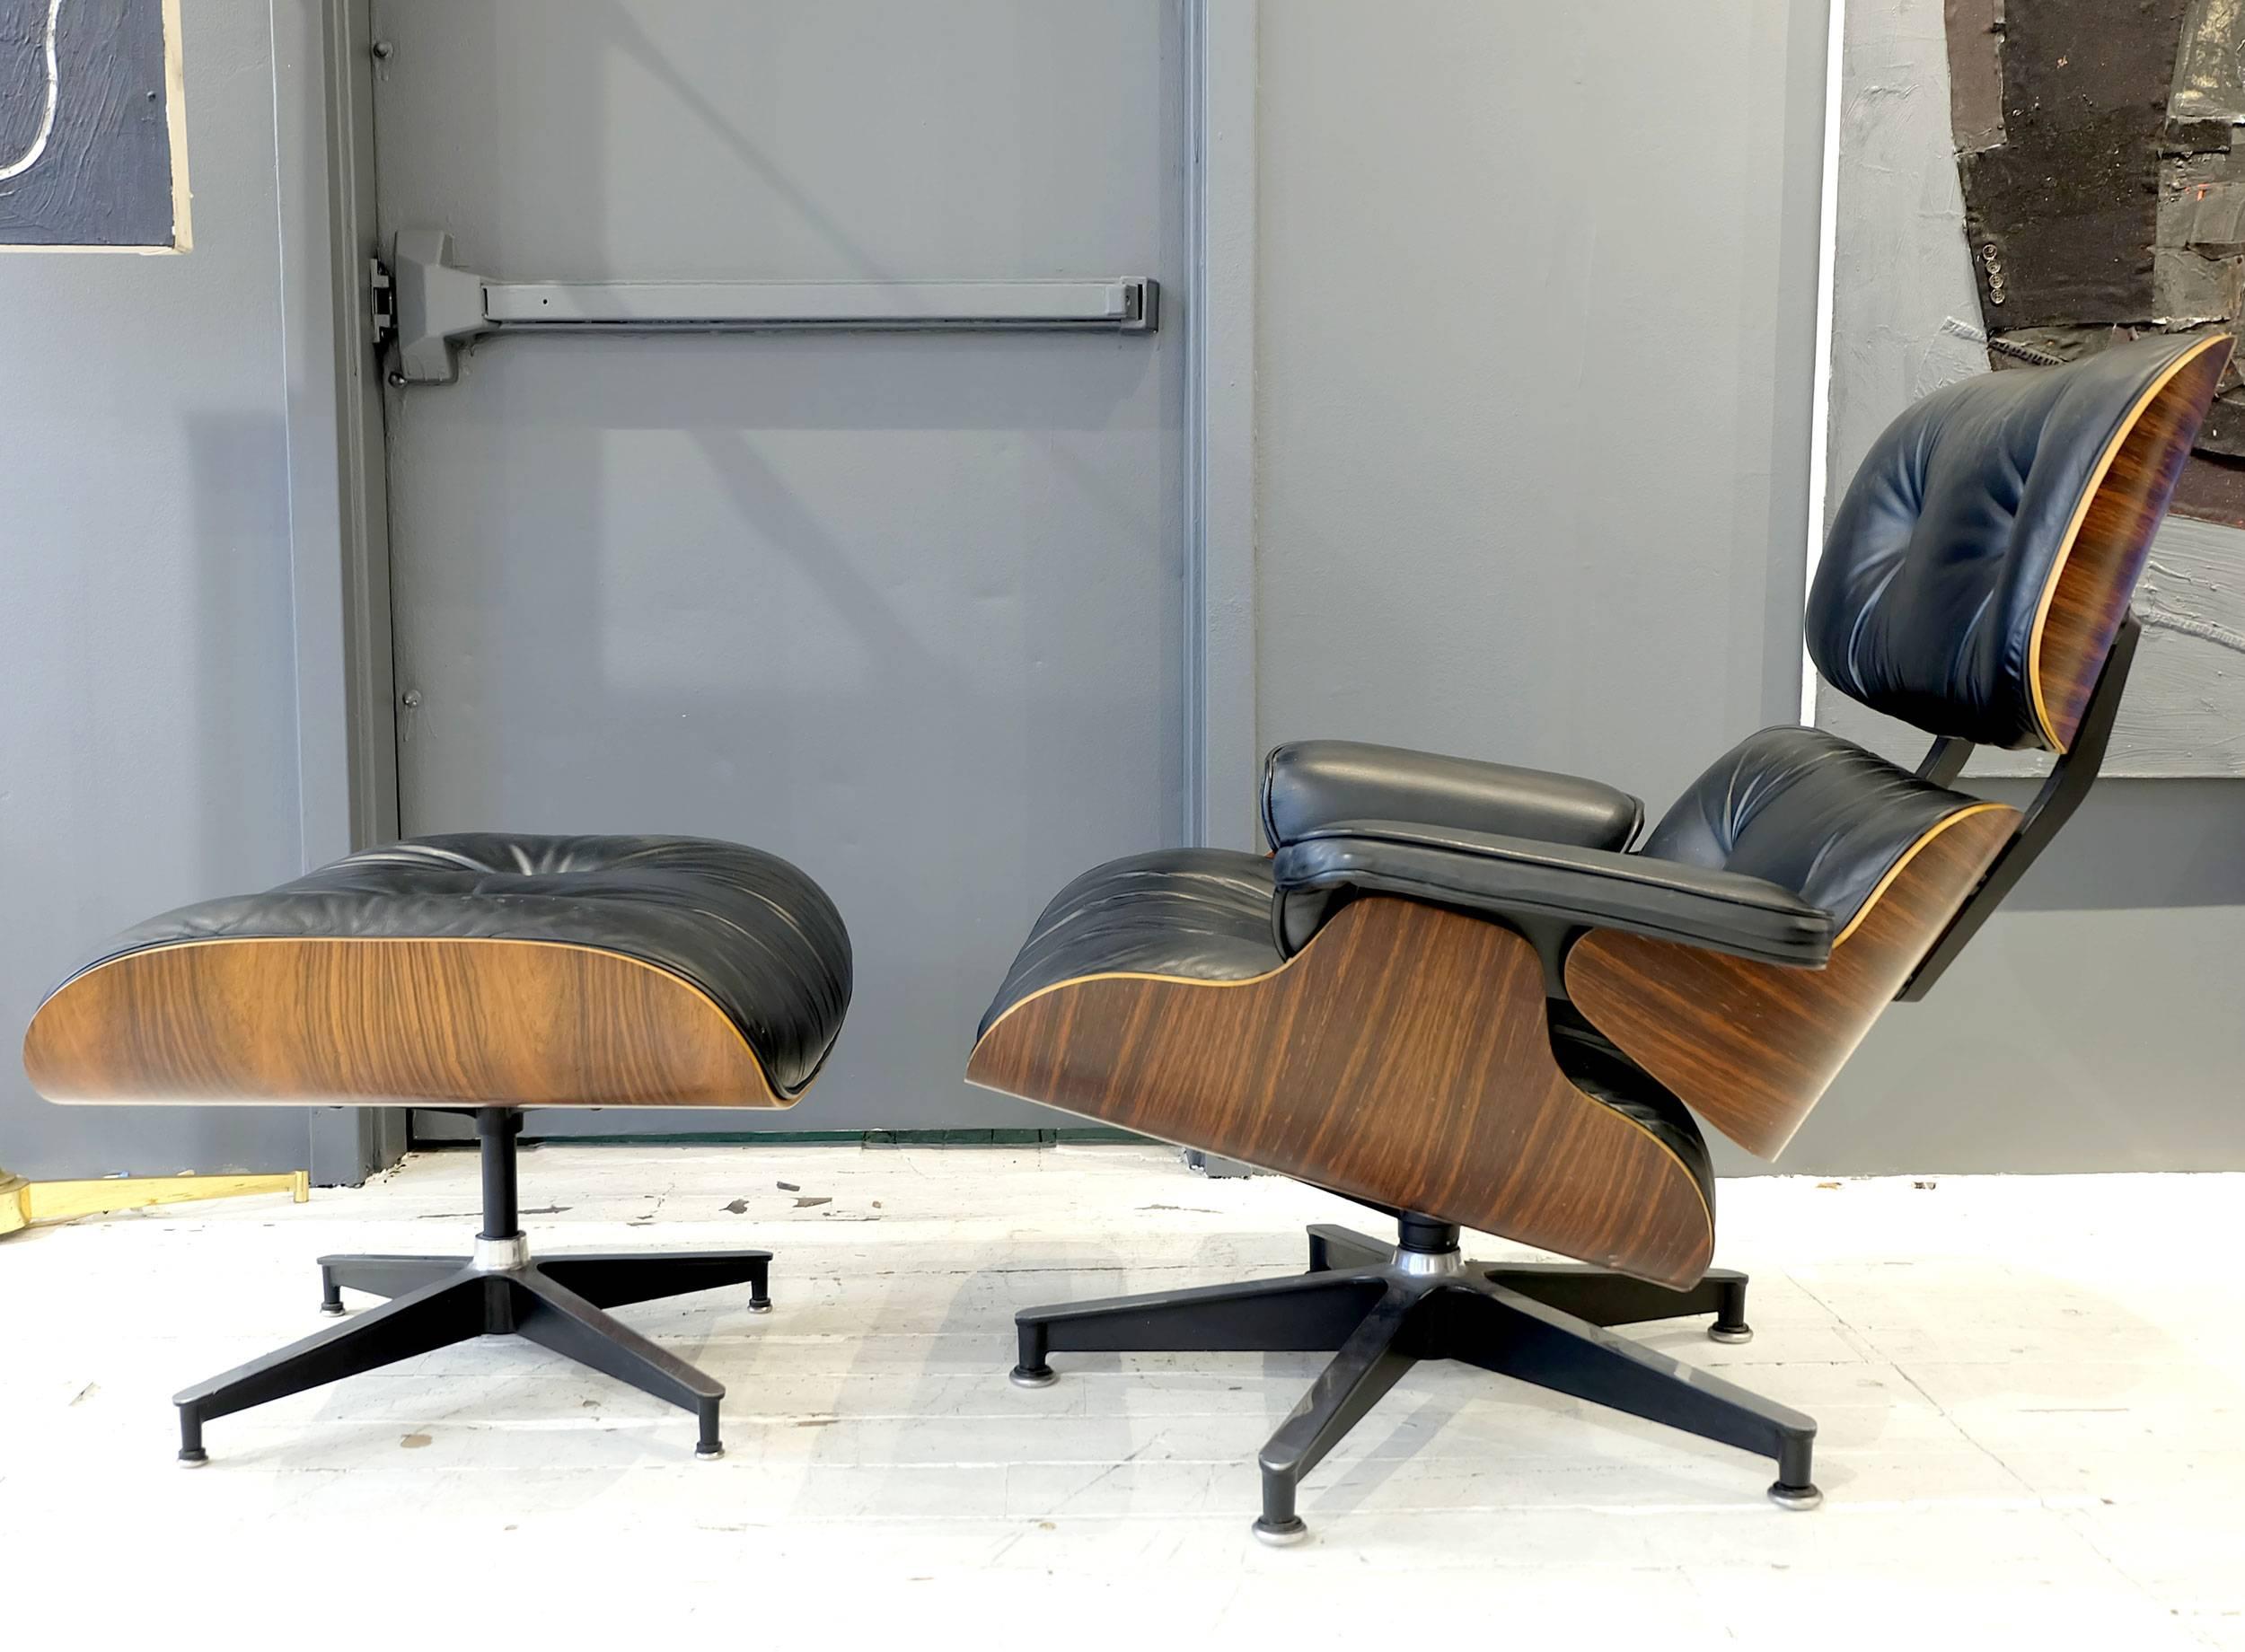 Charles and Ray Eames 670 lounge chair and 671 ottoman darker rosewood oil finish deep figure graining. Ottoman measures: 25.75 W x 22 D x 17 H inches.

This item is currently on view in our NYC Greenwich Street location